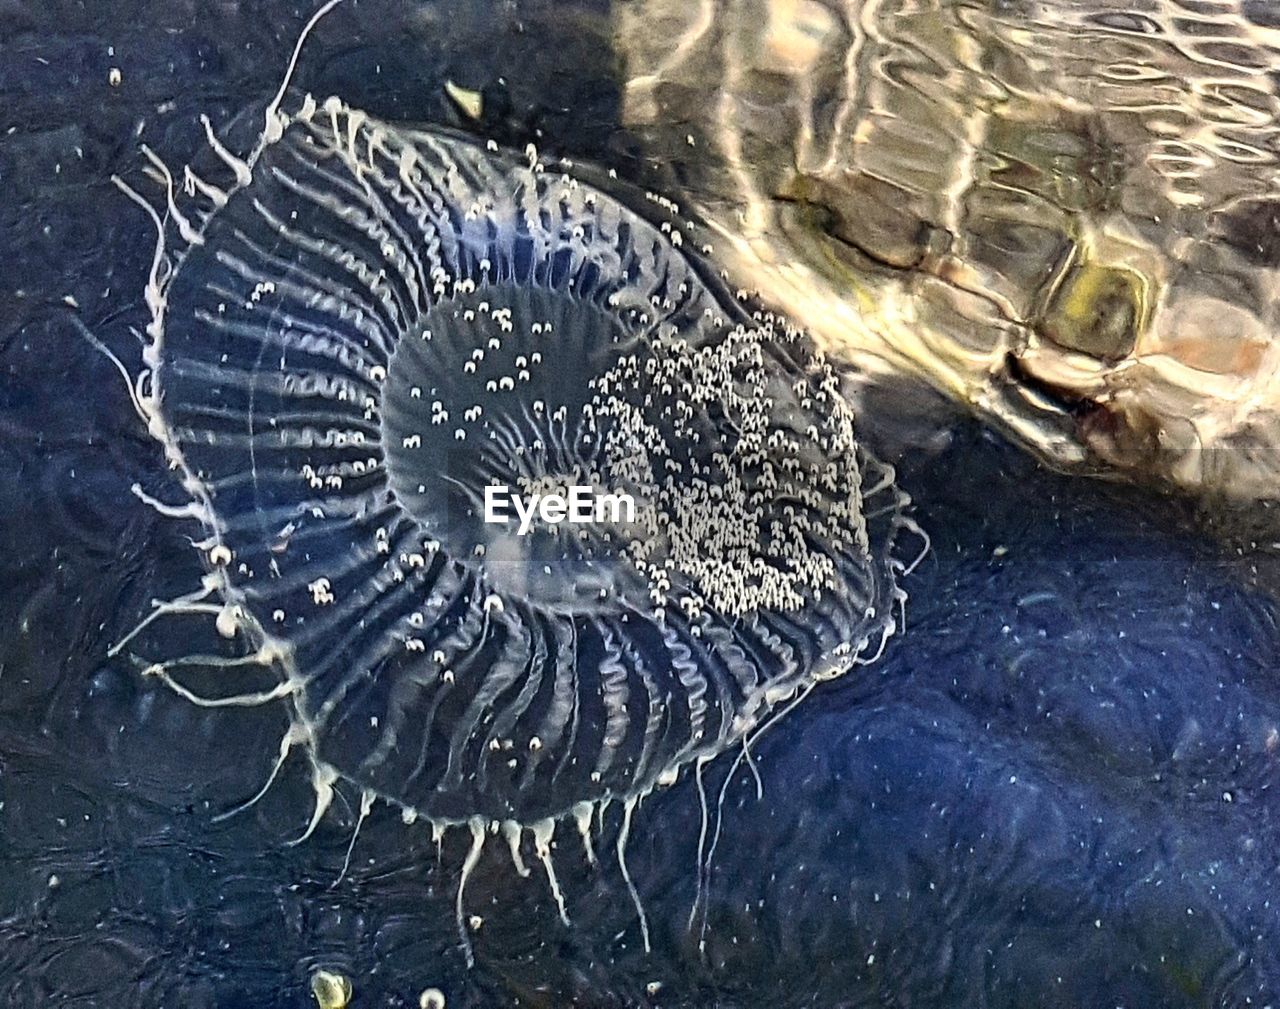 CLOSE-UP OF JELLYFISH IN WATER